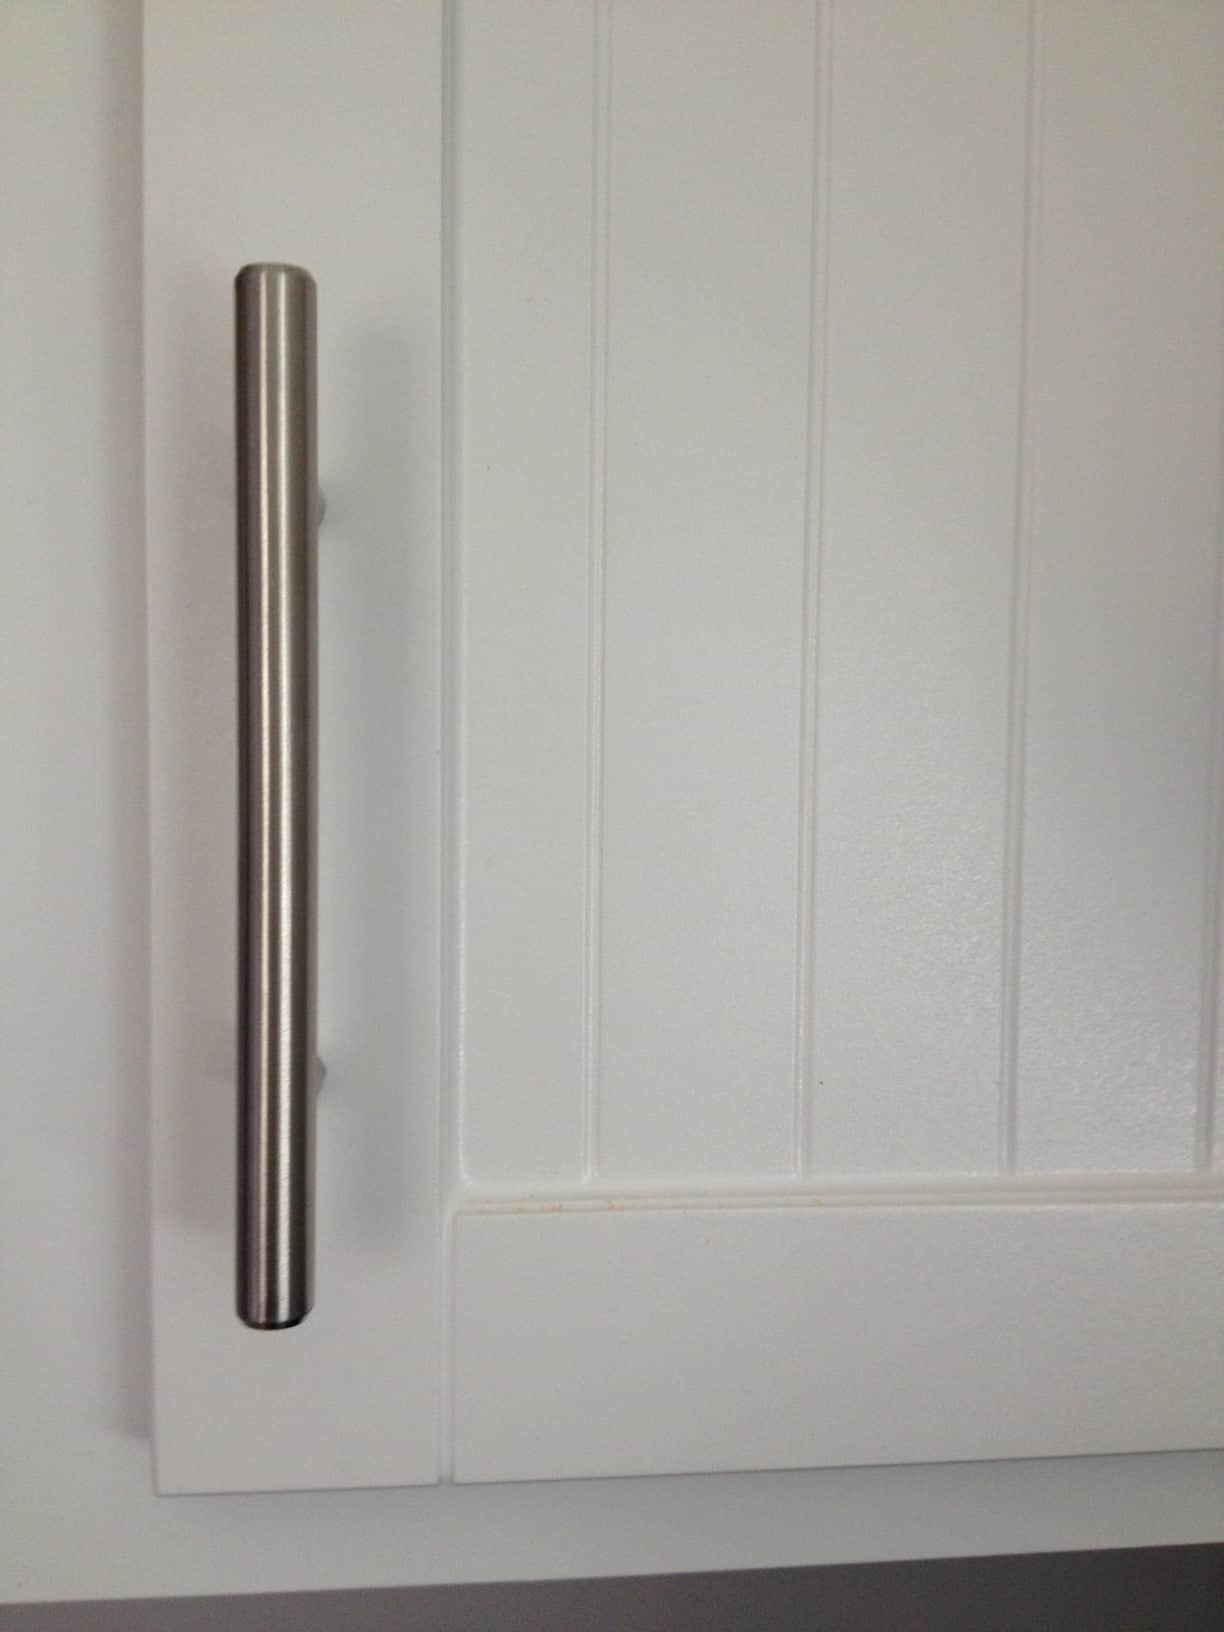 A closeup of an upgraded, white kitchen cabinet with silver hardware